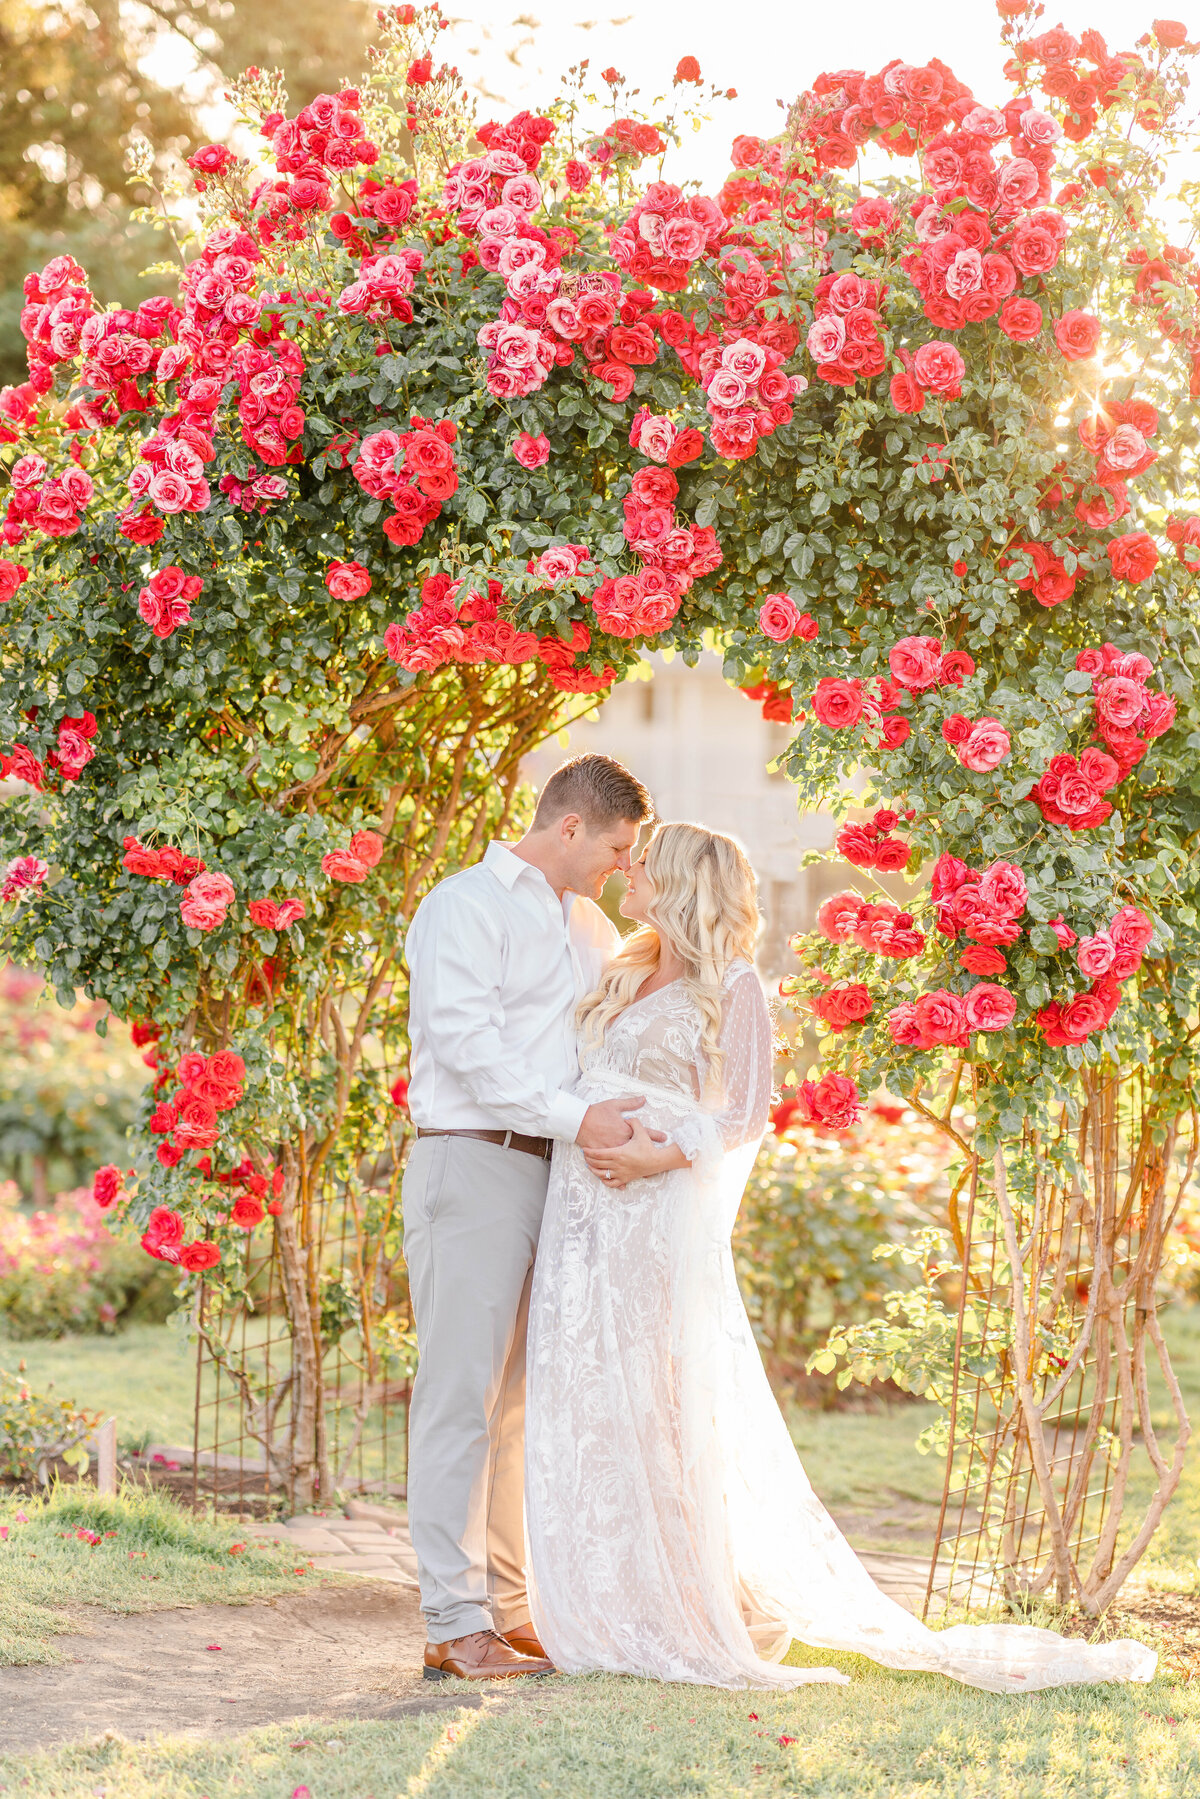 An expecting couple stands in a rose garden archway looking into one another's eyes while both caressing her beautiful baby bump photographed by Bay area photographer, Light Livin Photography.